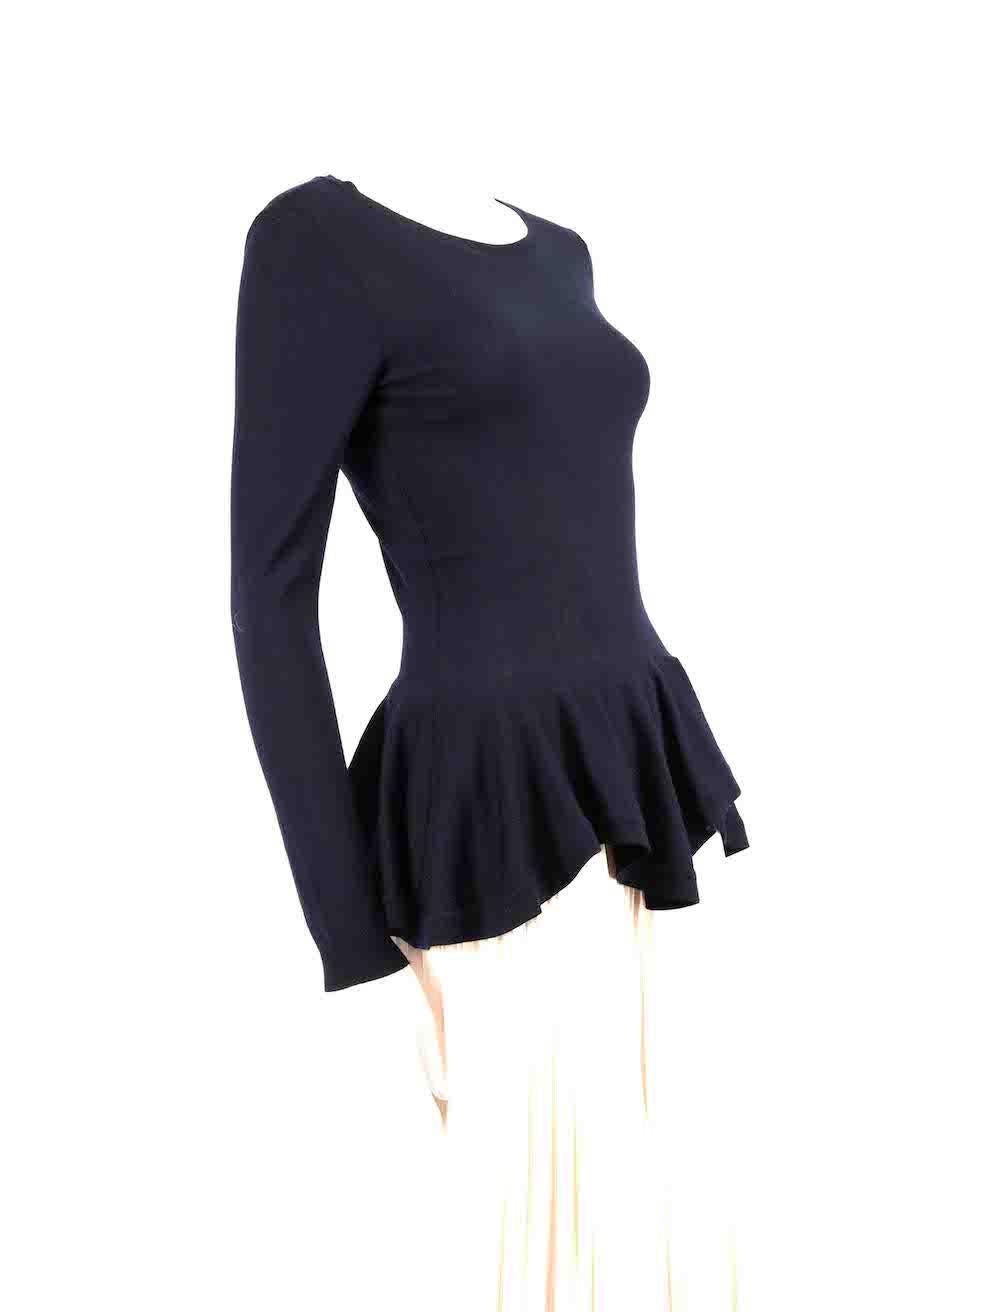 CONDITION is Very good. Hardly any visible wear to top is evident on this used Alexander McQueen designer resale item.
 
 Details
 Navy
 Wool
 Knit top
 Long sleeves
 Round neck
 Stretchy
 Peplum hem
 
 
 Made in Italy
 
 Composition
 100% Wool
 
